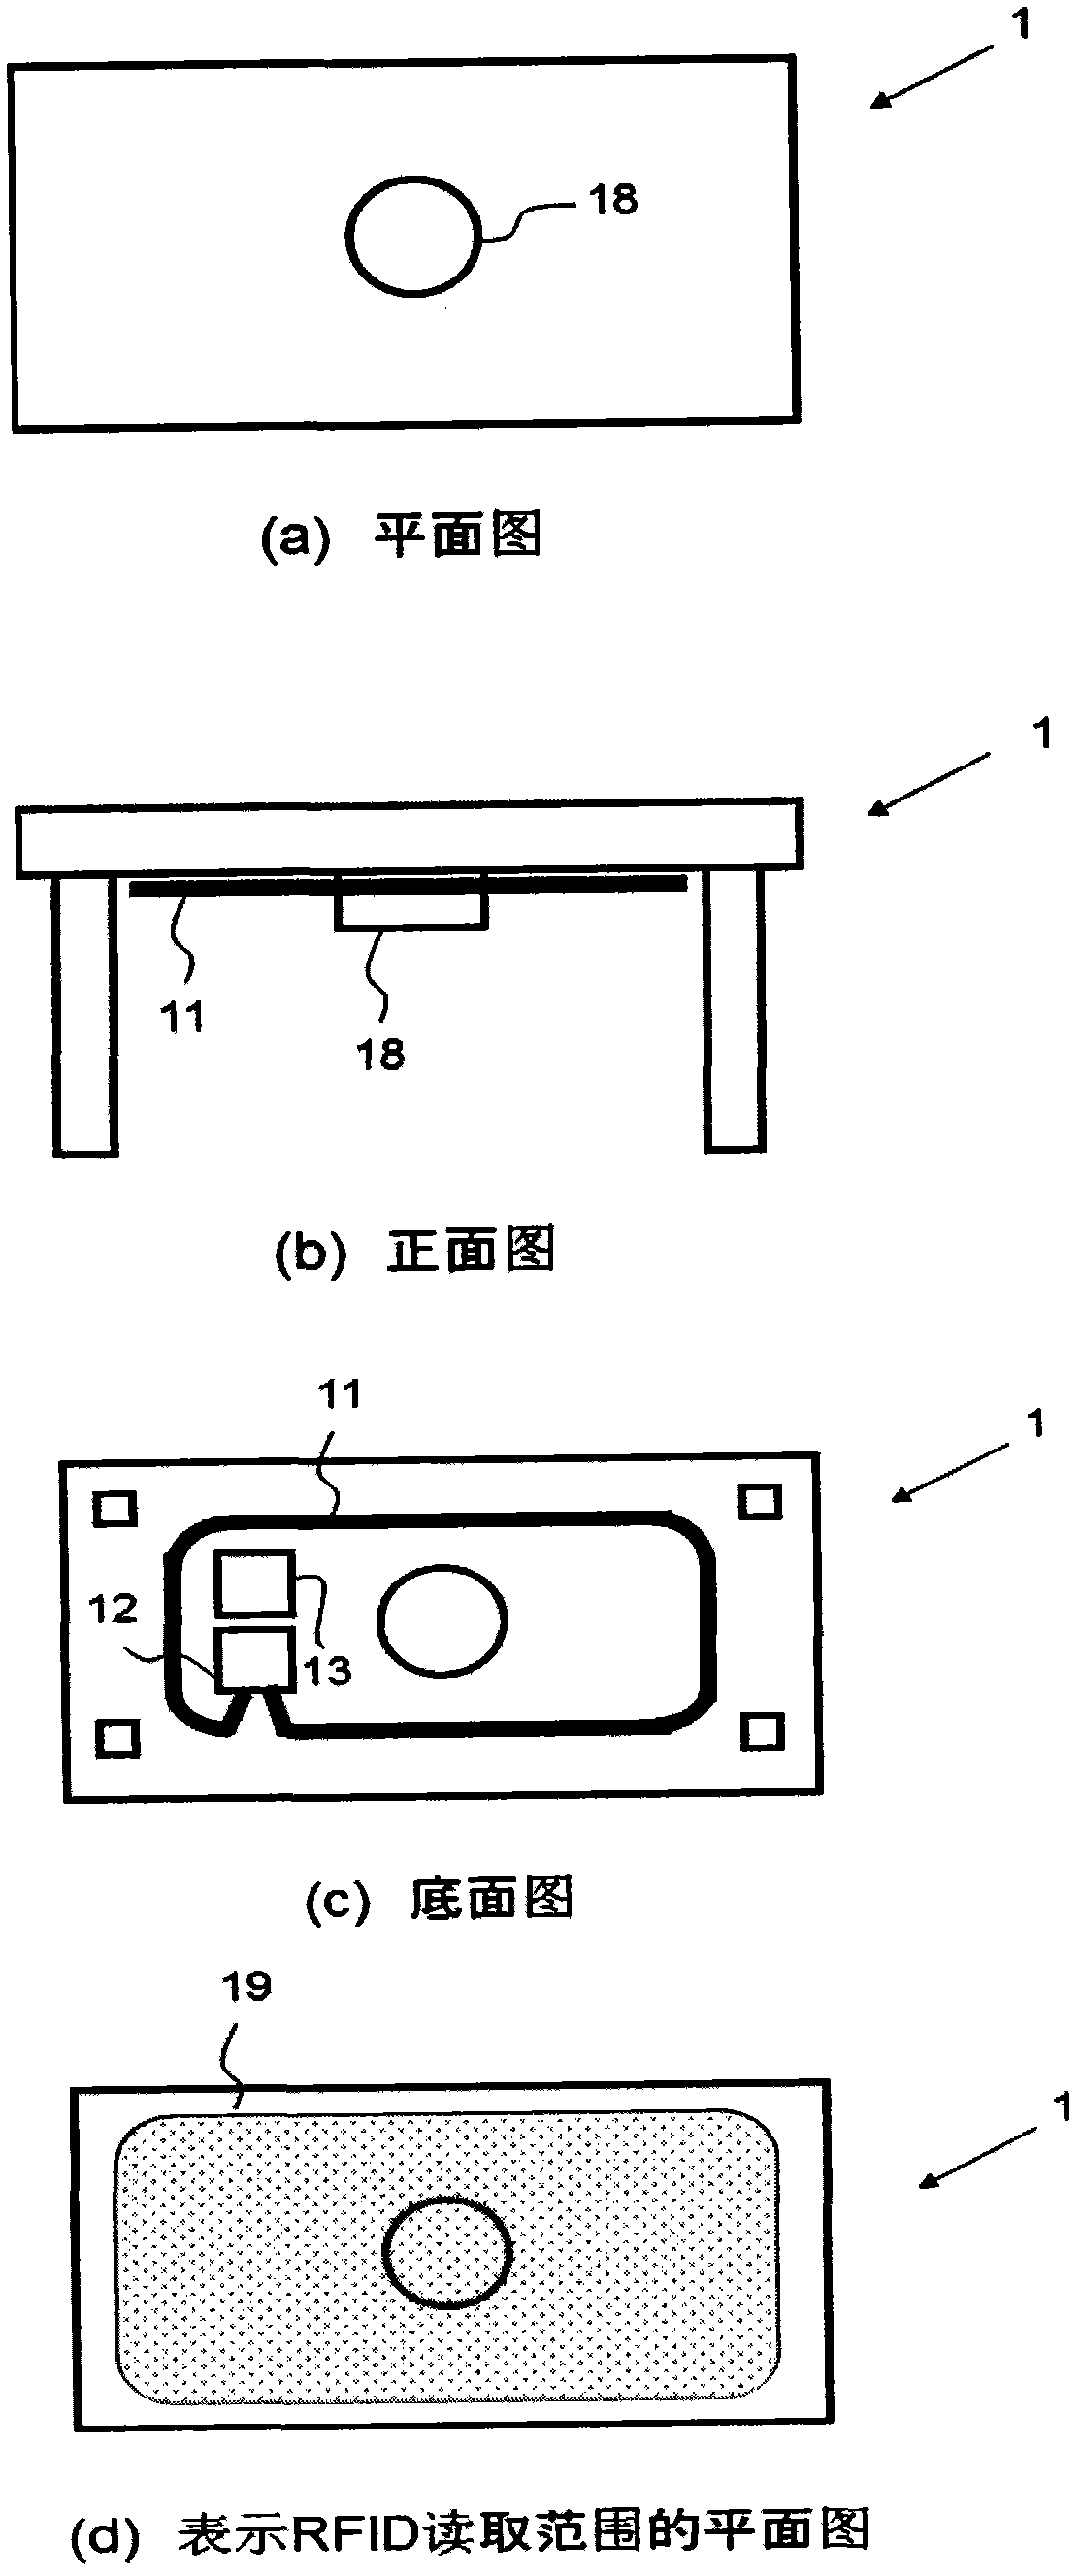 Dining table and serving information processing system